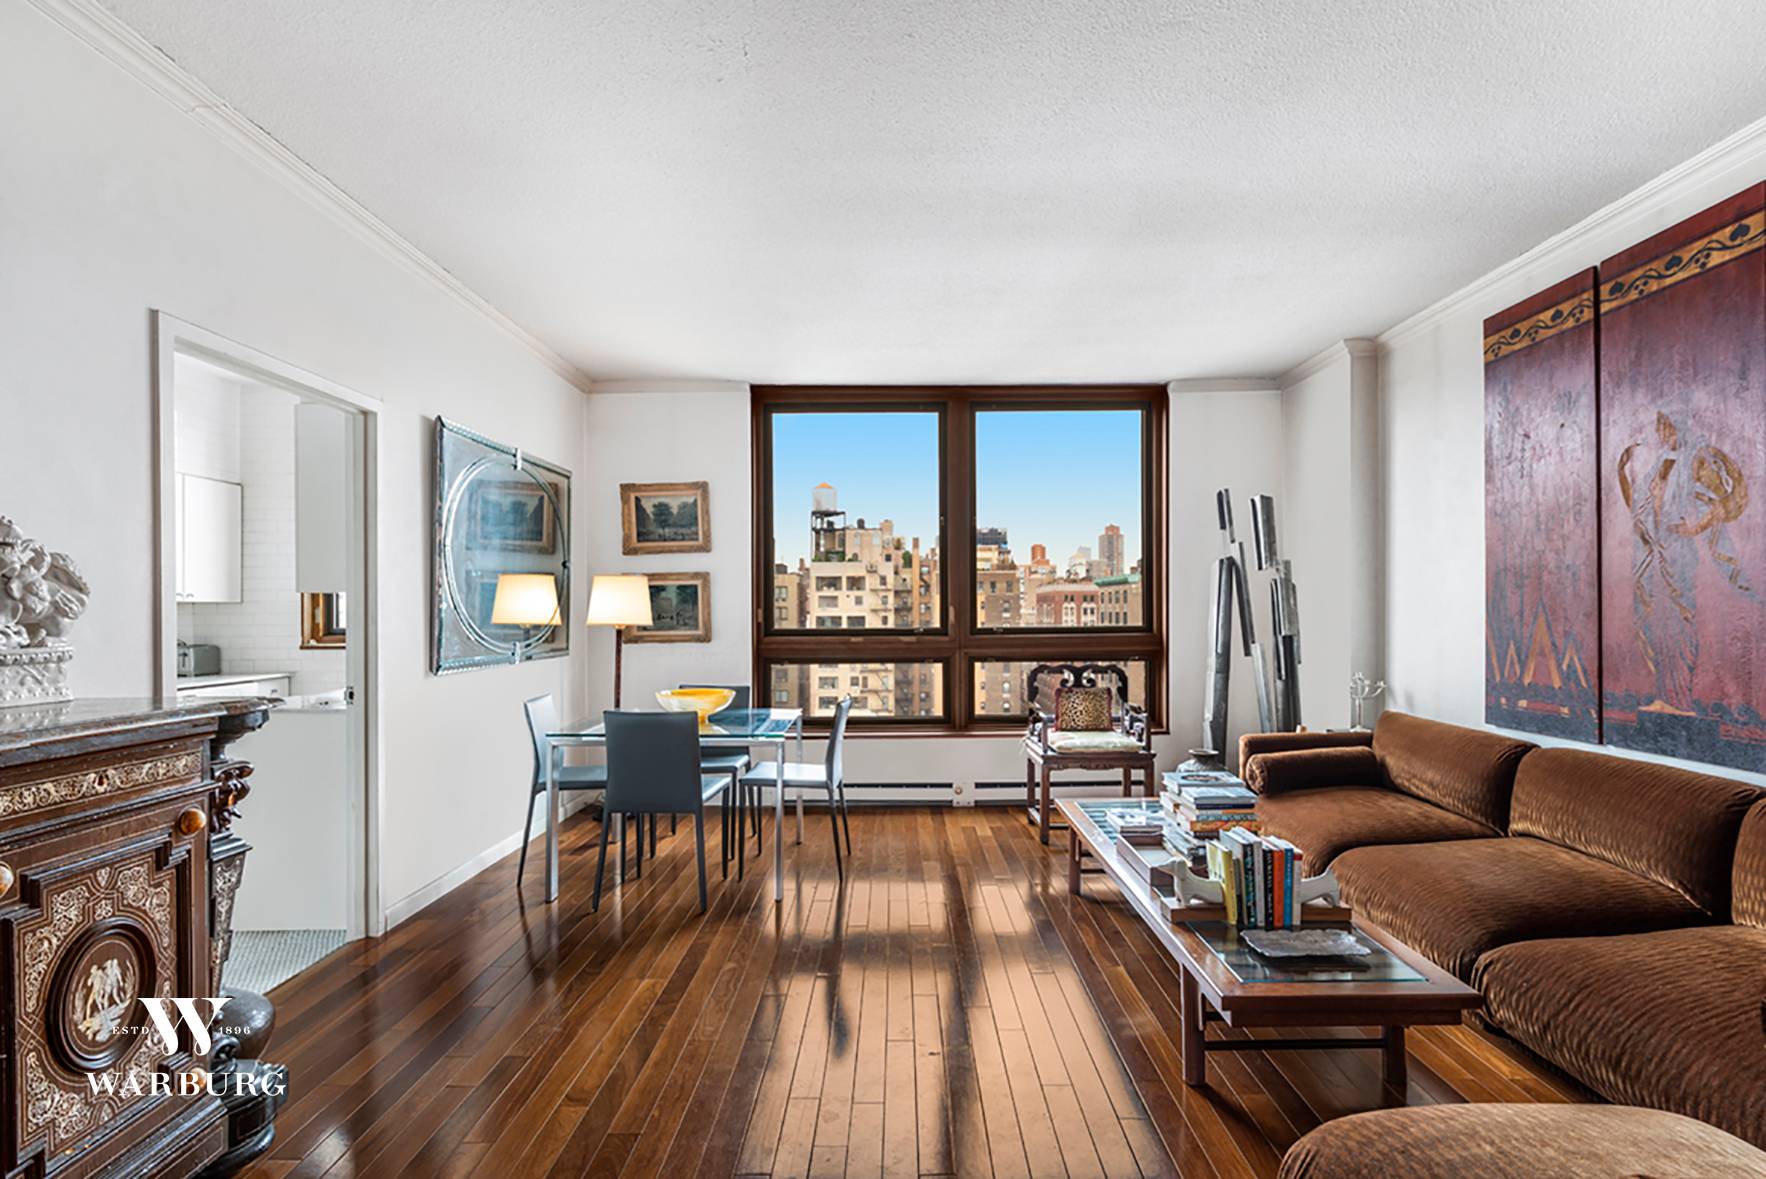 Apartment 15A is a sun filled 2 bedroom home in La Residence, a condominium designed by Thierry Despont at 1080 Madison Avenue between 81st and 82nd Street.